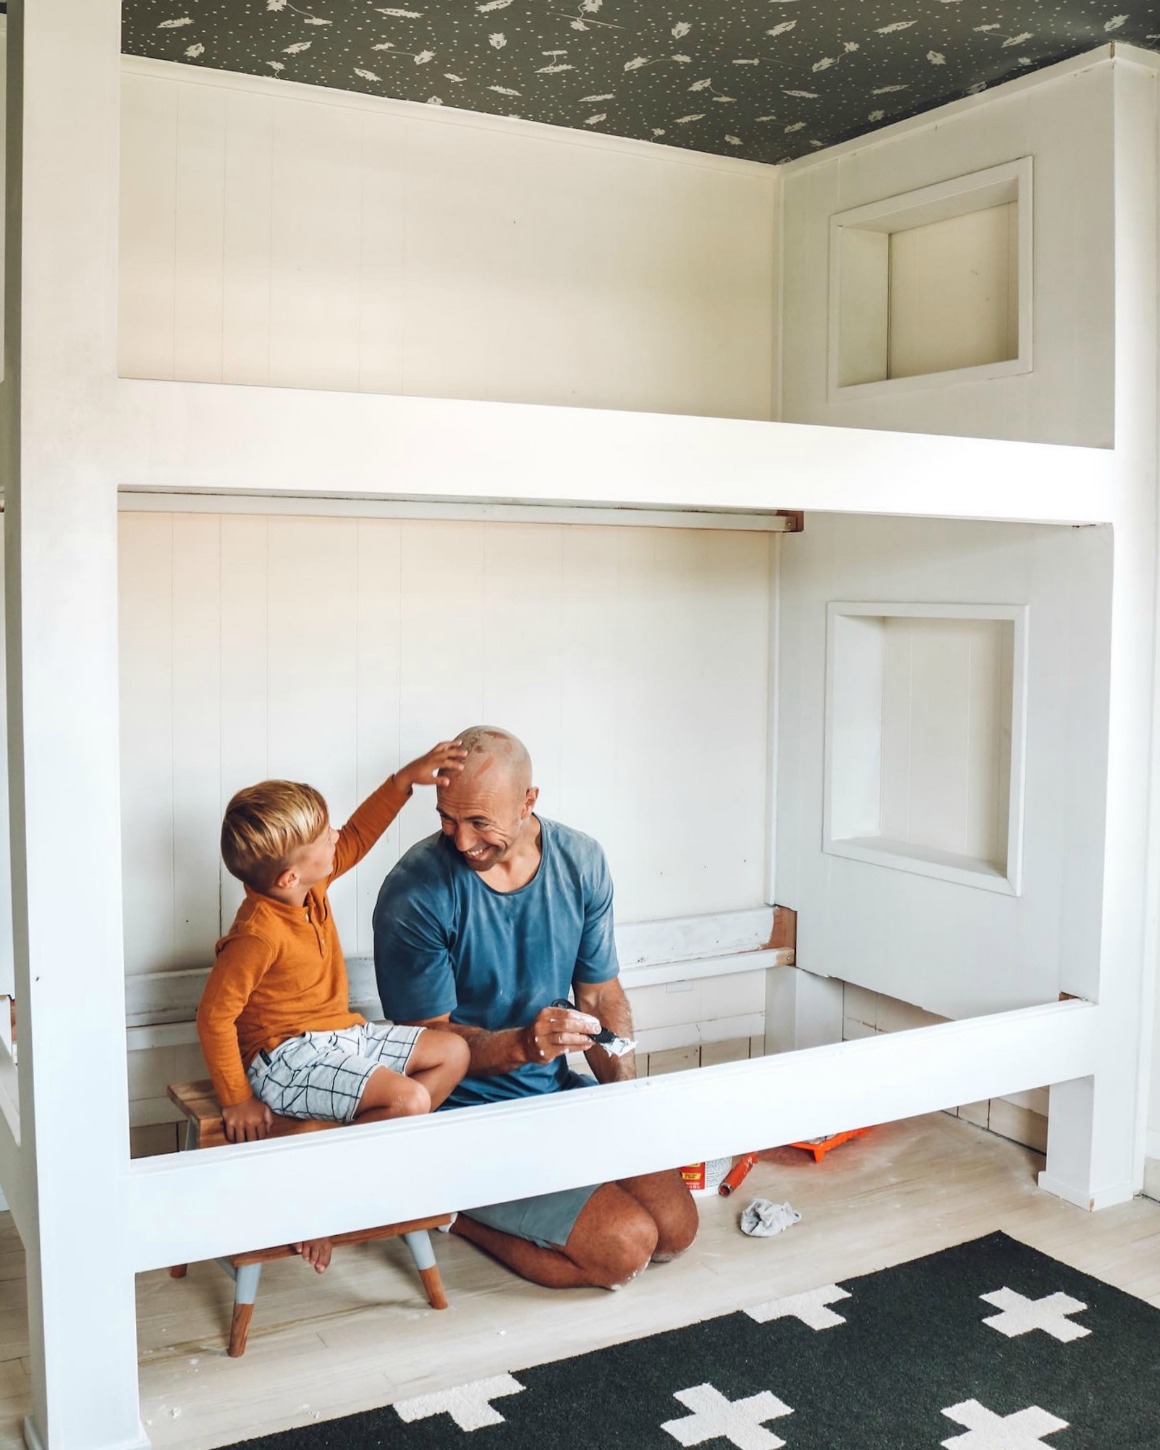 Built In Bunkbed Diy For 500 Nesting, Bunk Bed Kits To Build